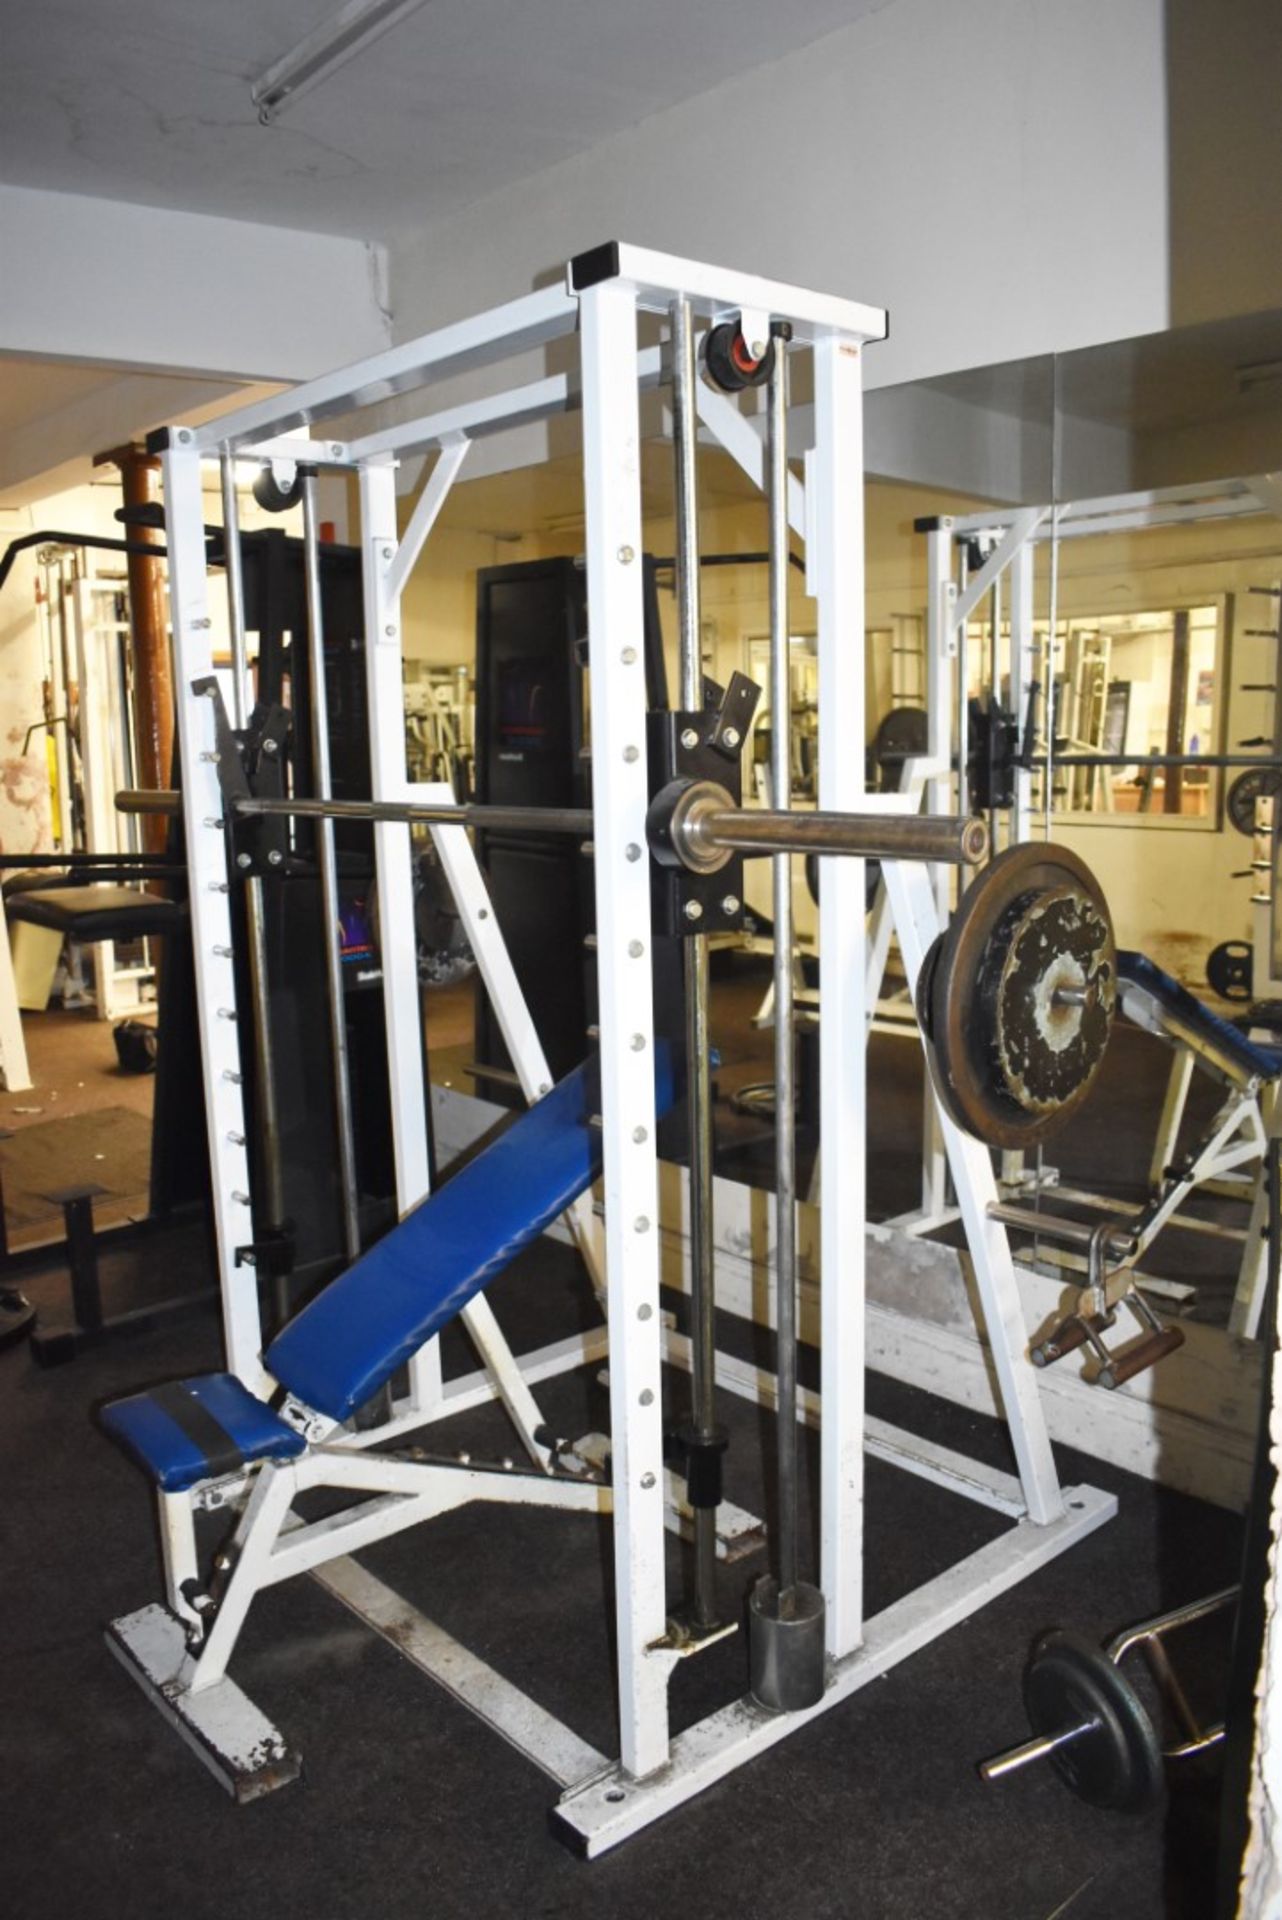 Contents of Bodybuilding and Strongman Gym - Includes Approx 30 Pieces of Gym Equipment, Floor Mats, - Image 28 of 95